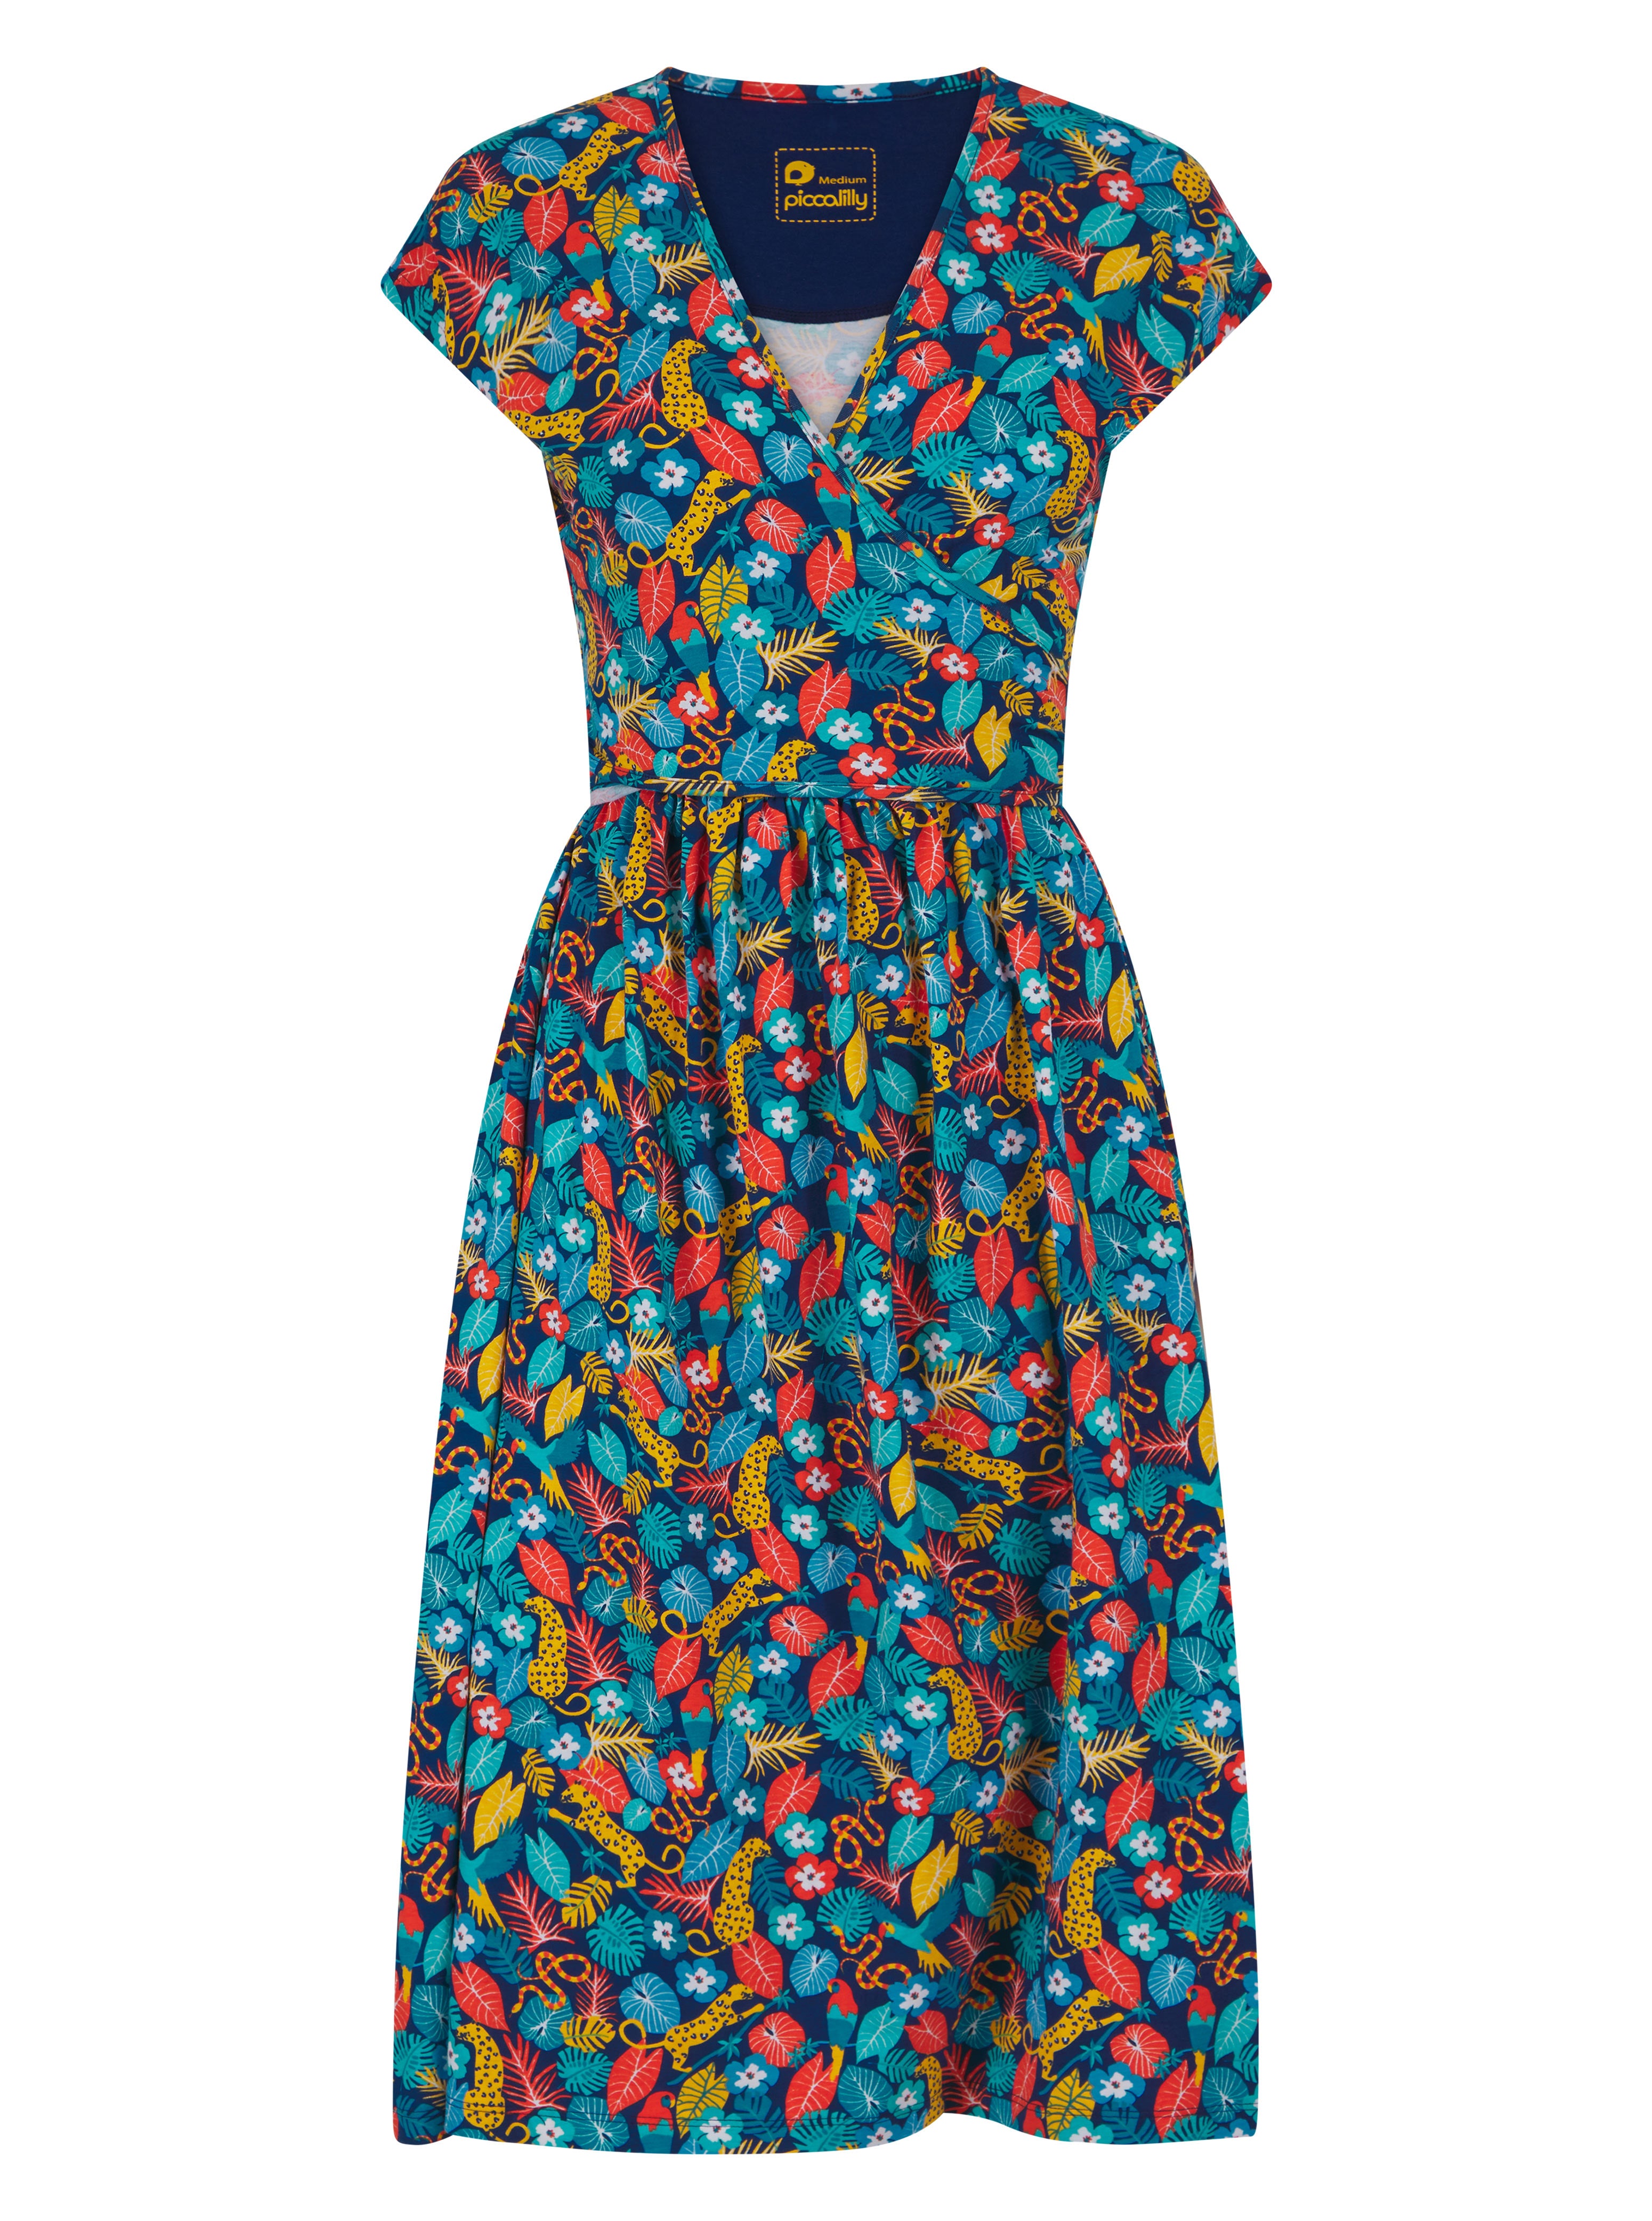 Piccalilly Adult Wrap Dress - Tropic